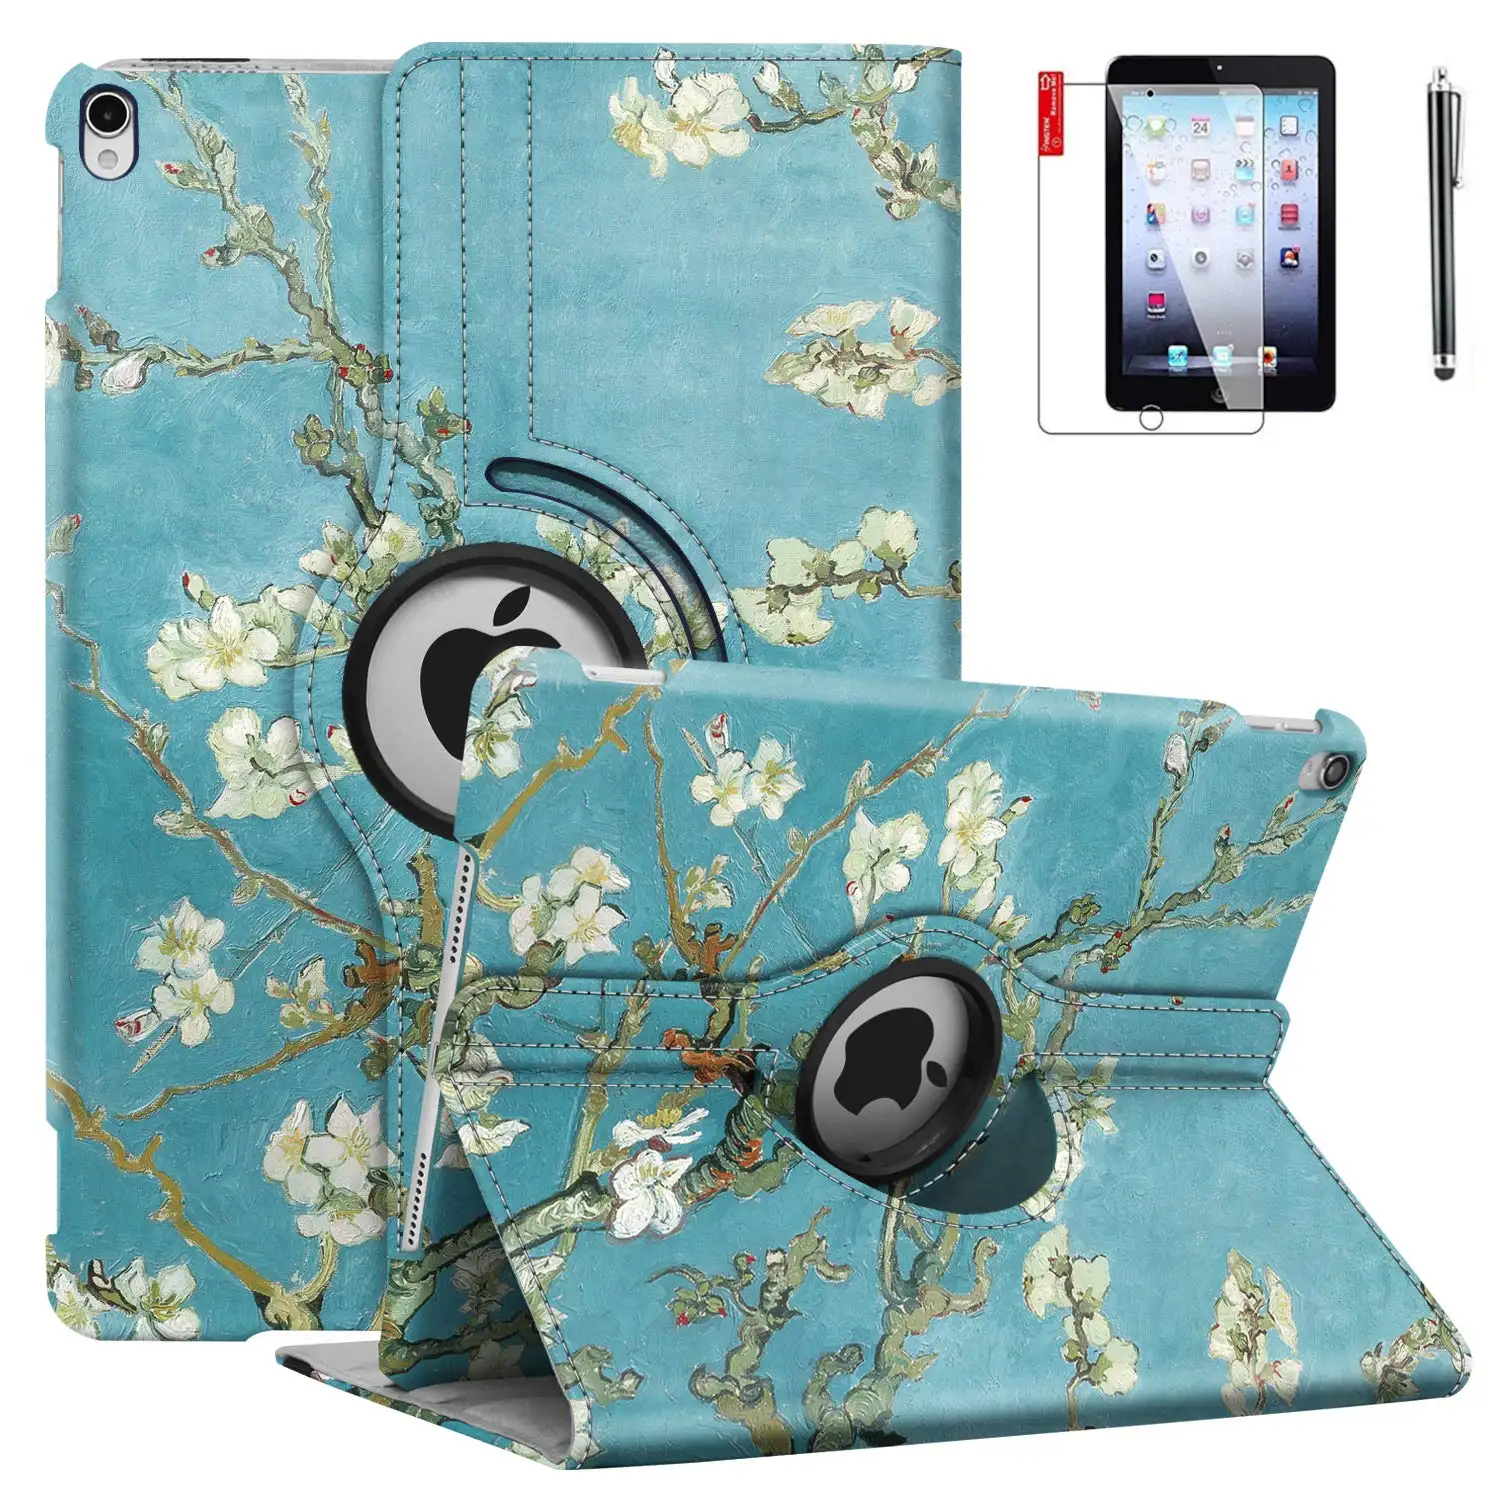 2022 NEW Hot sales Tablet computer pattern rotating leather case ipad3 rotating litchi pattern leather case for Apple iPad